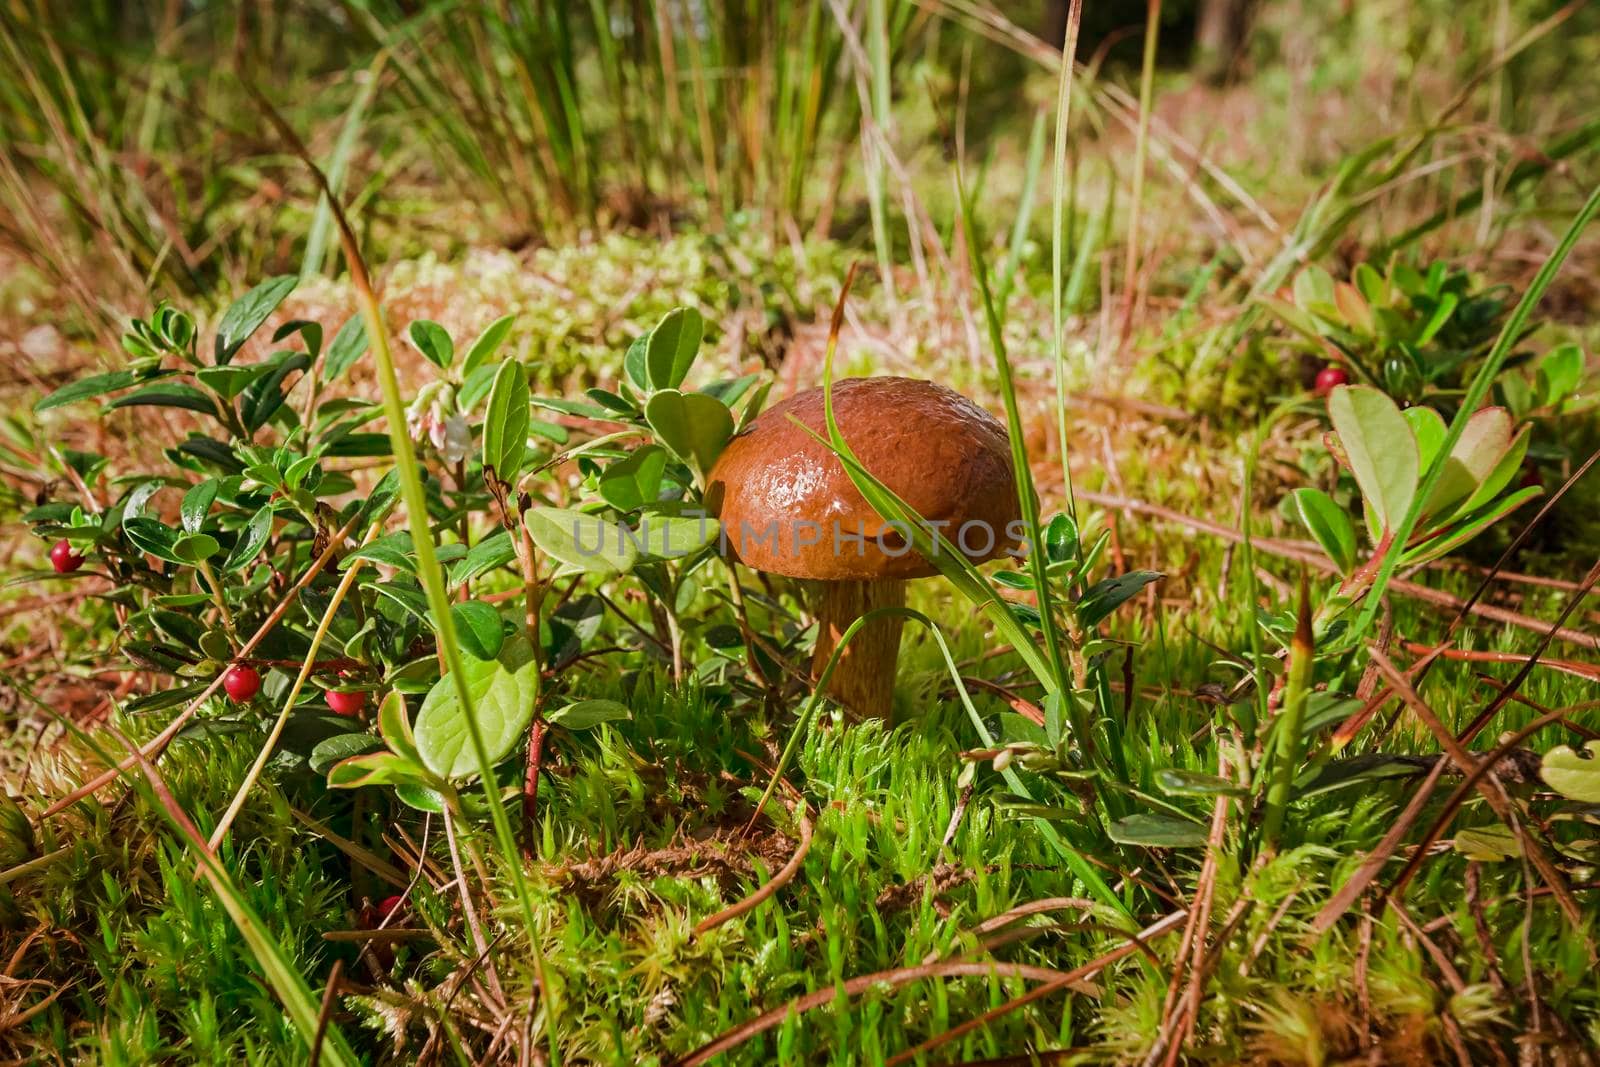 Mushroom in the forest by SNR